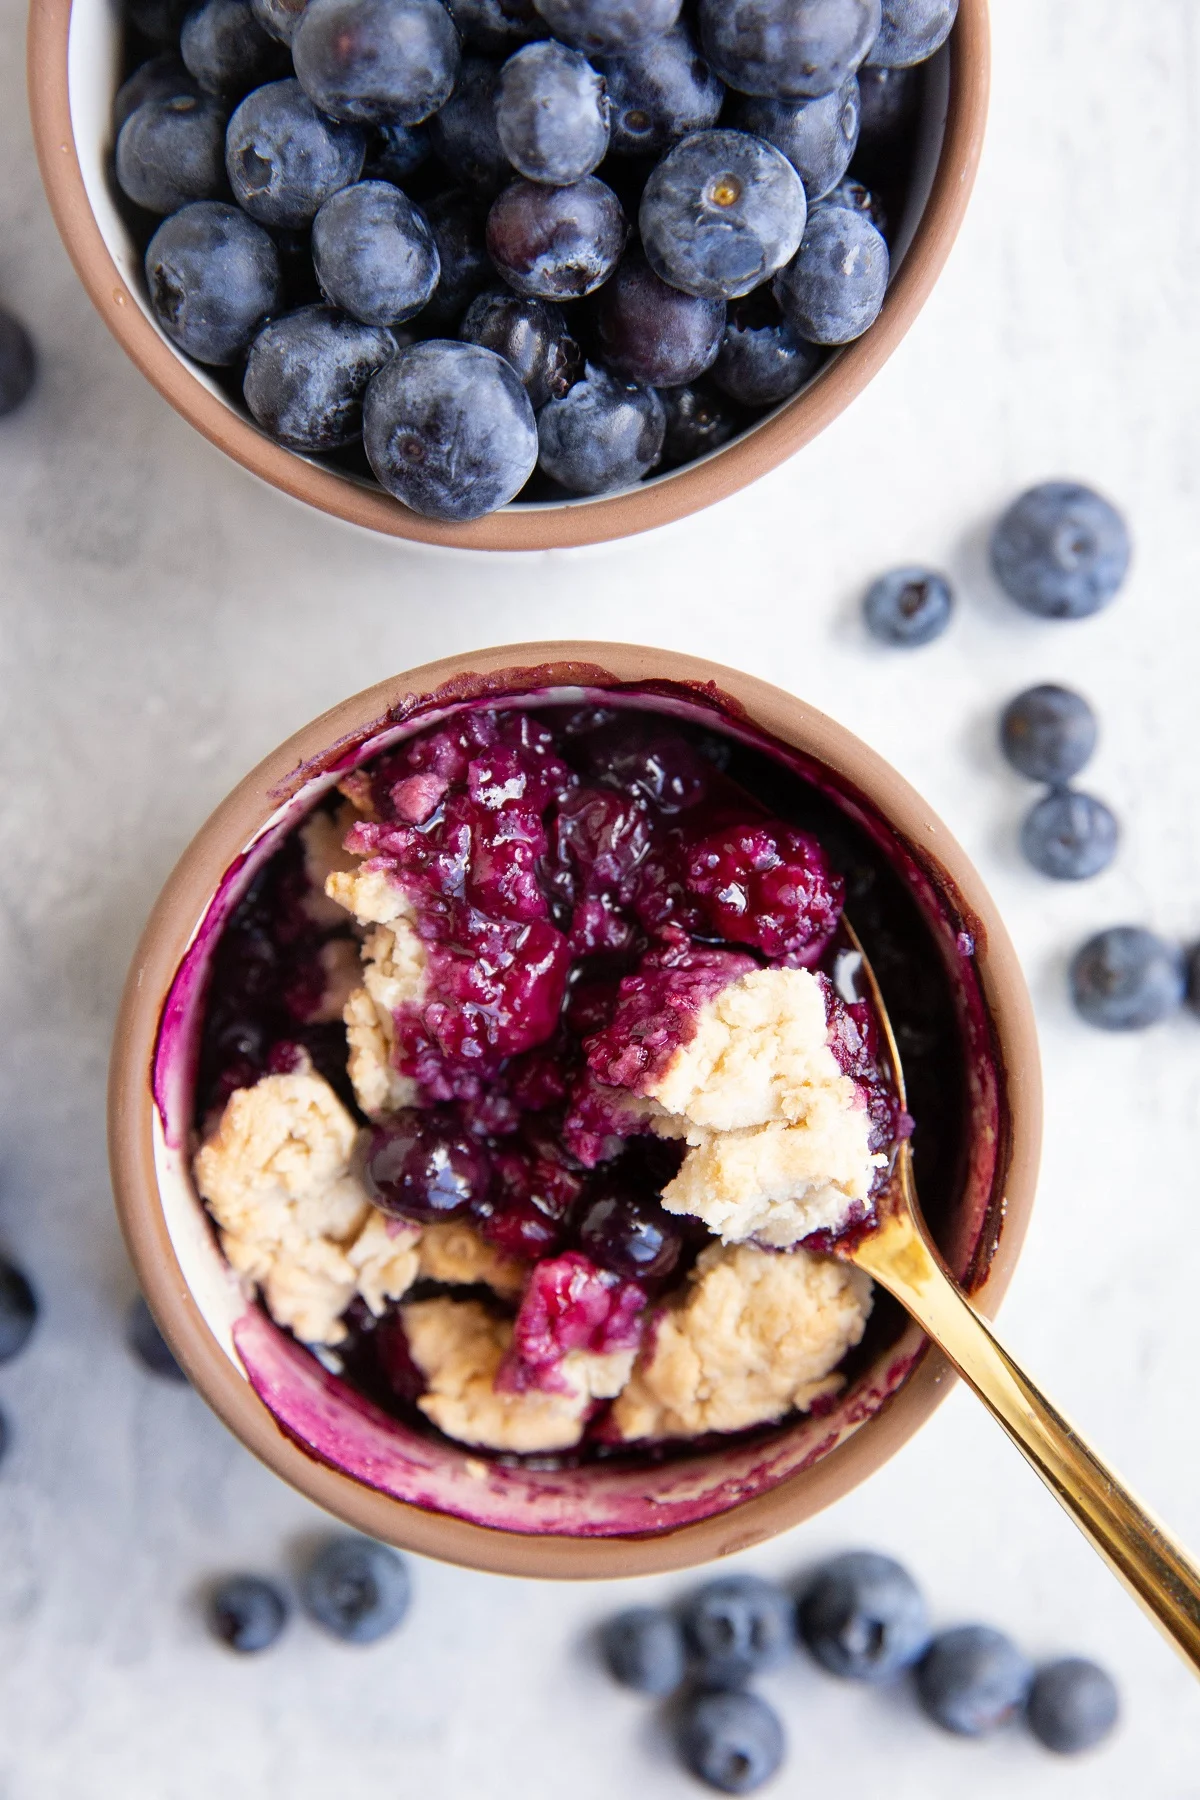 Two ramekins of blueberries and blueberry cobbler with fresh blueberries all around.